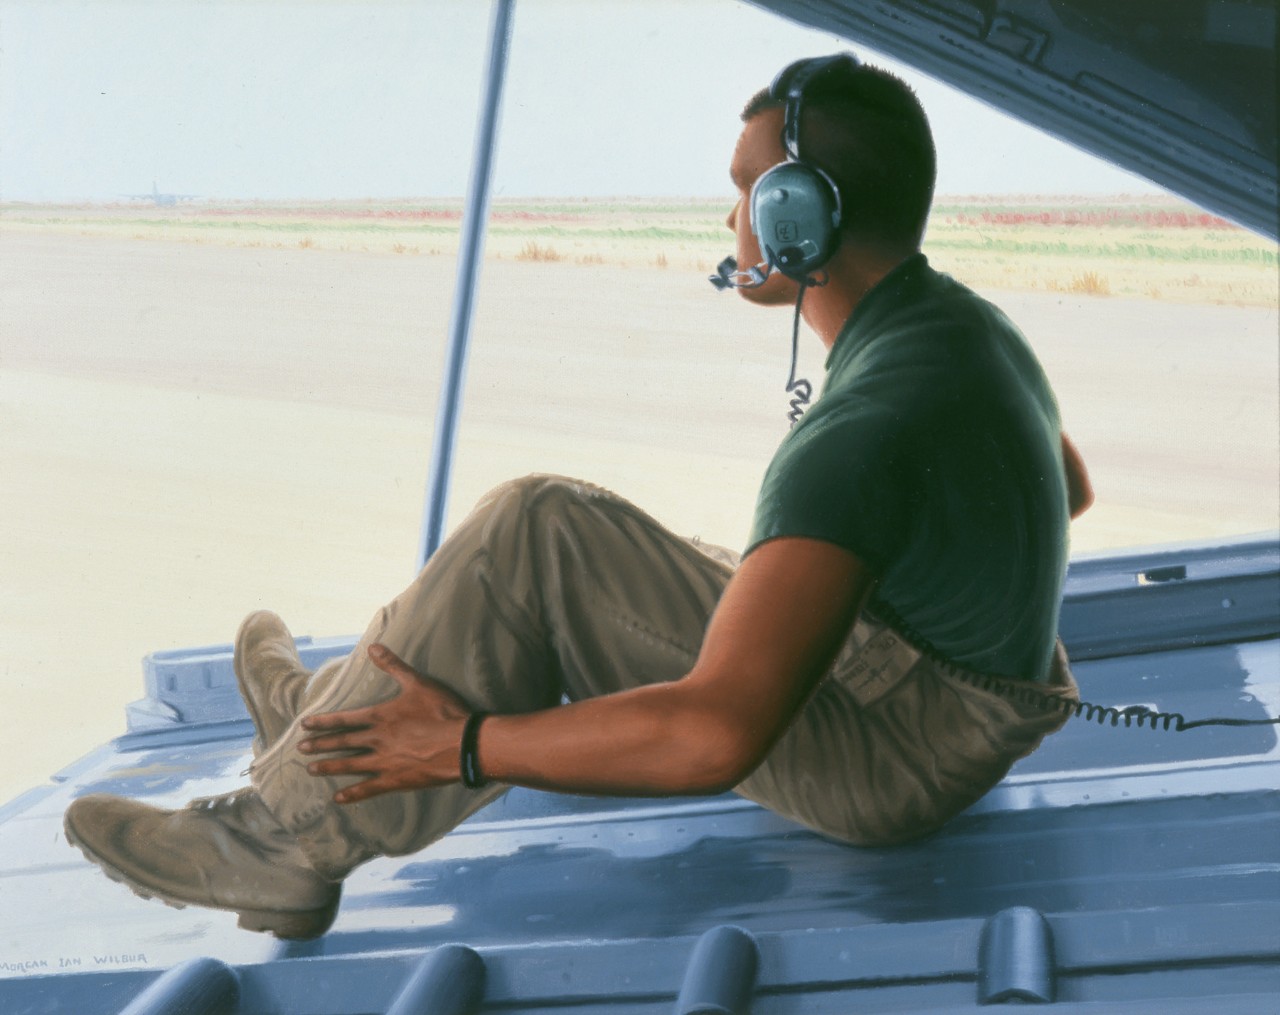 A marine sits on the ramp of a C-130 airplane with his communications gear on